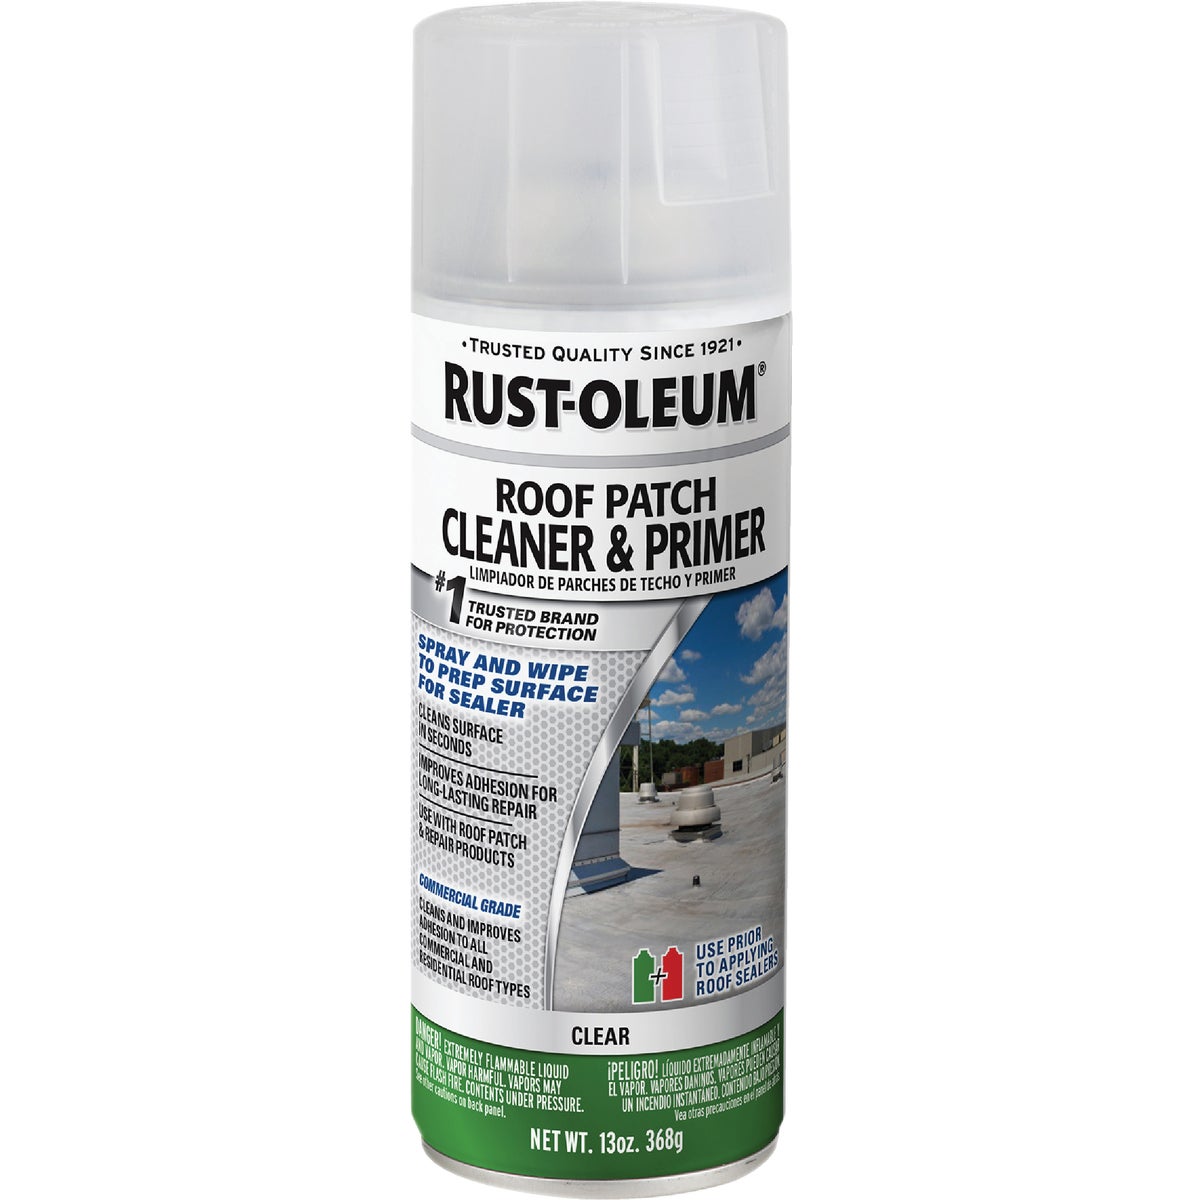 Rust-Oleum 13 Oz. Clear Roofing Patch Cleaner & Primer Spray